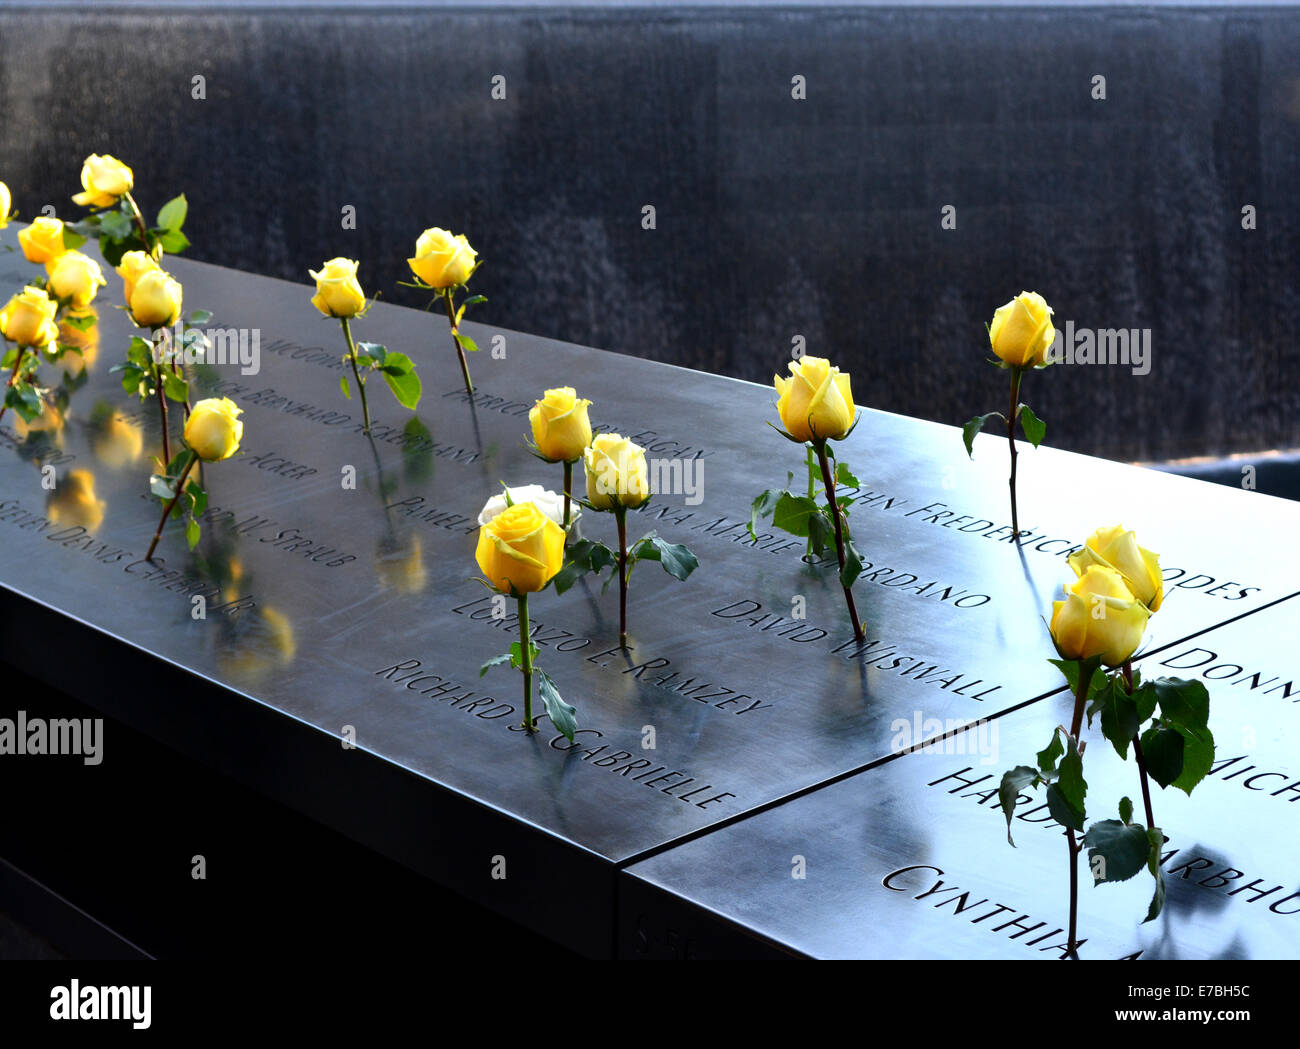 New York, USA. 11th September, 2014. Flowers left at the National 9/11 Memorial at Ground Zero on the 13th anniversary of the attacks in New York City Credit: © Christopher Penler/Alamy Live News  Stock Photo